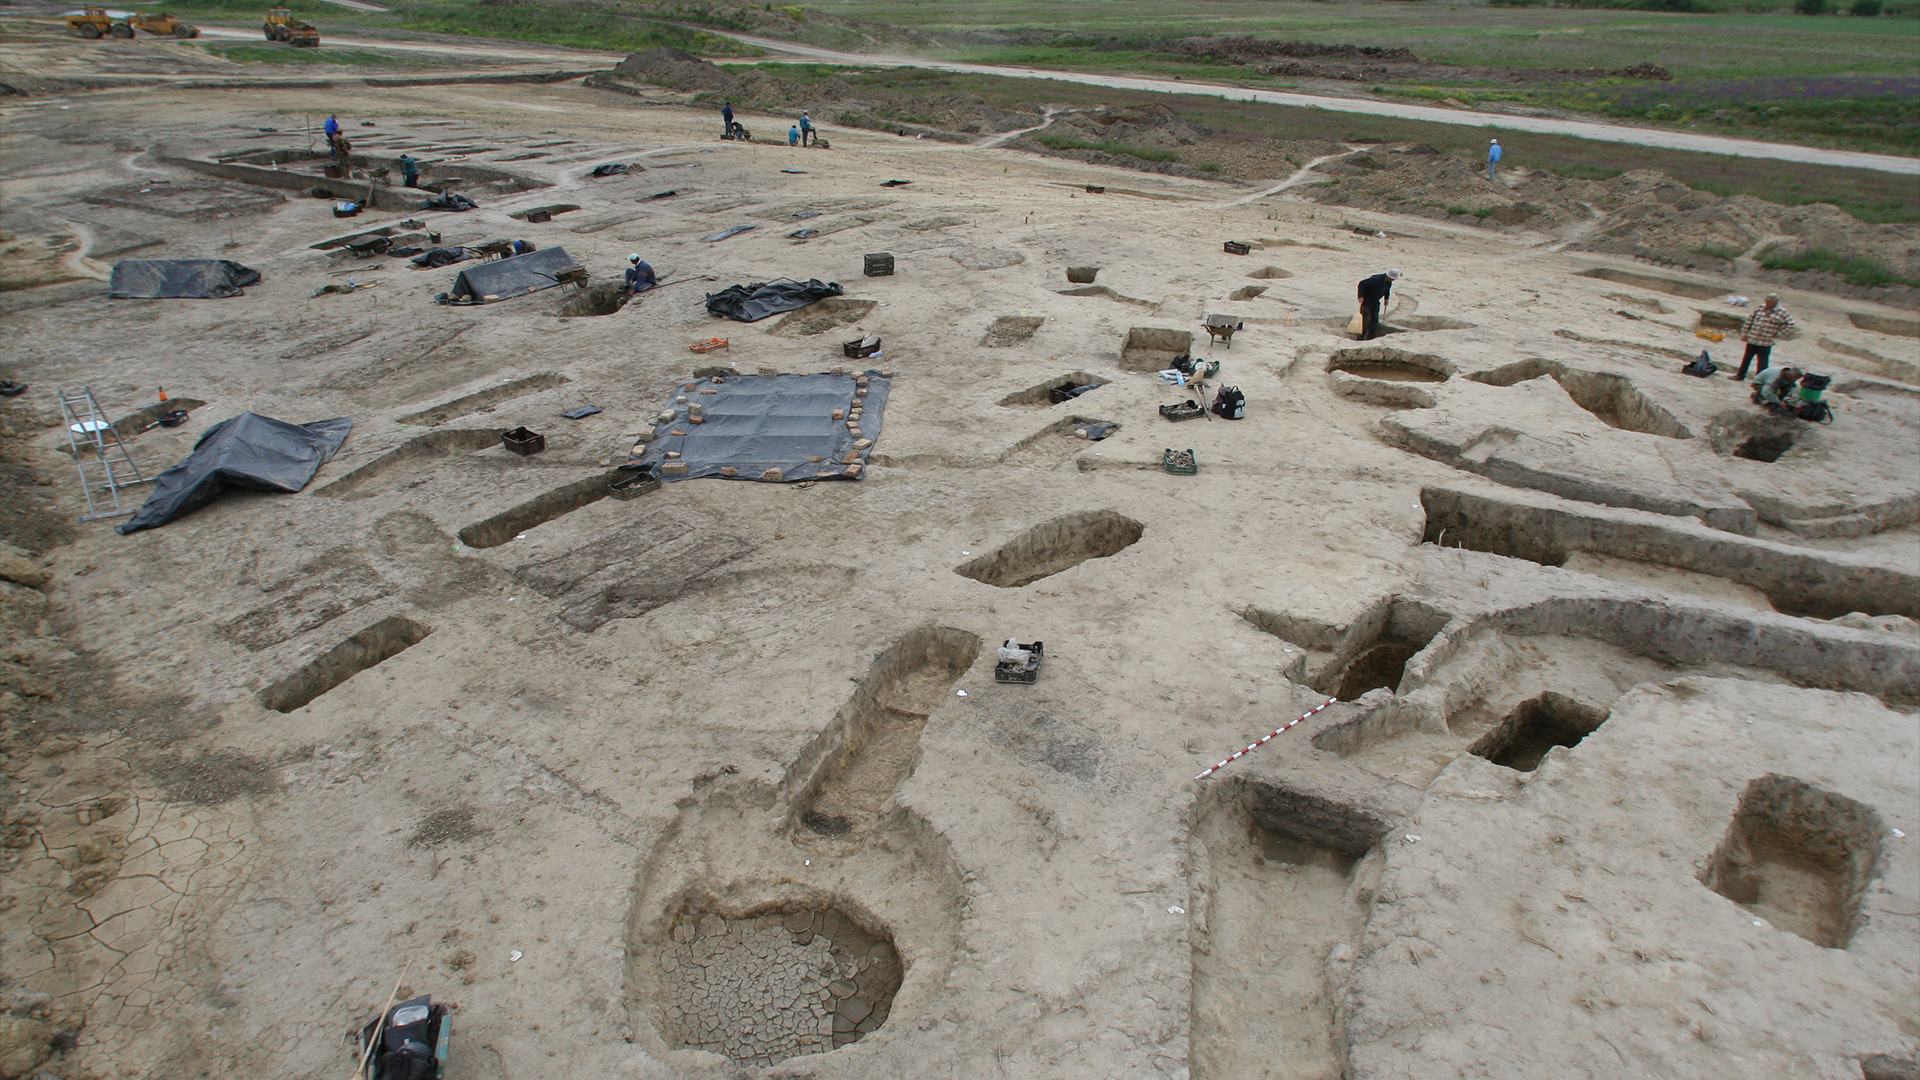 landscape photo of the excavation site, showing holes of different shapes dug up across the field of packed dirt